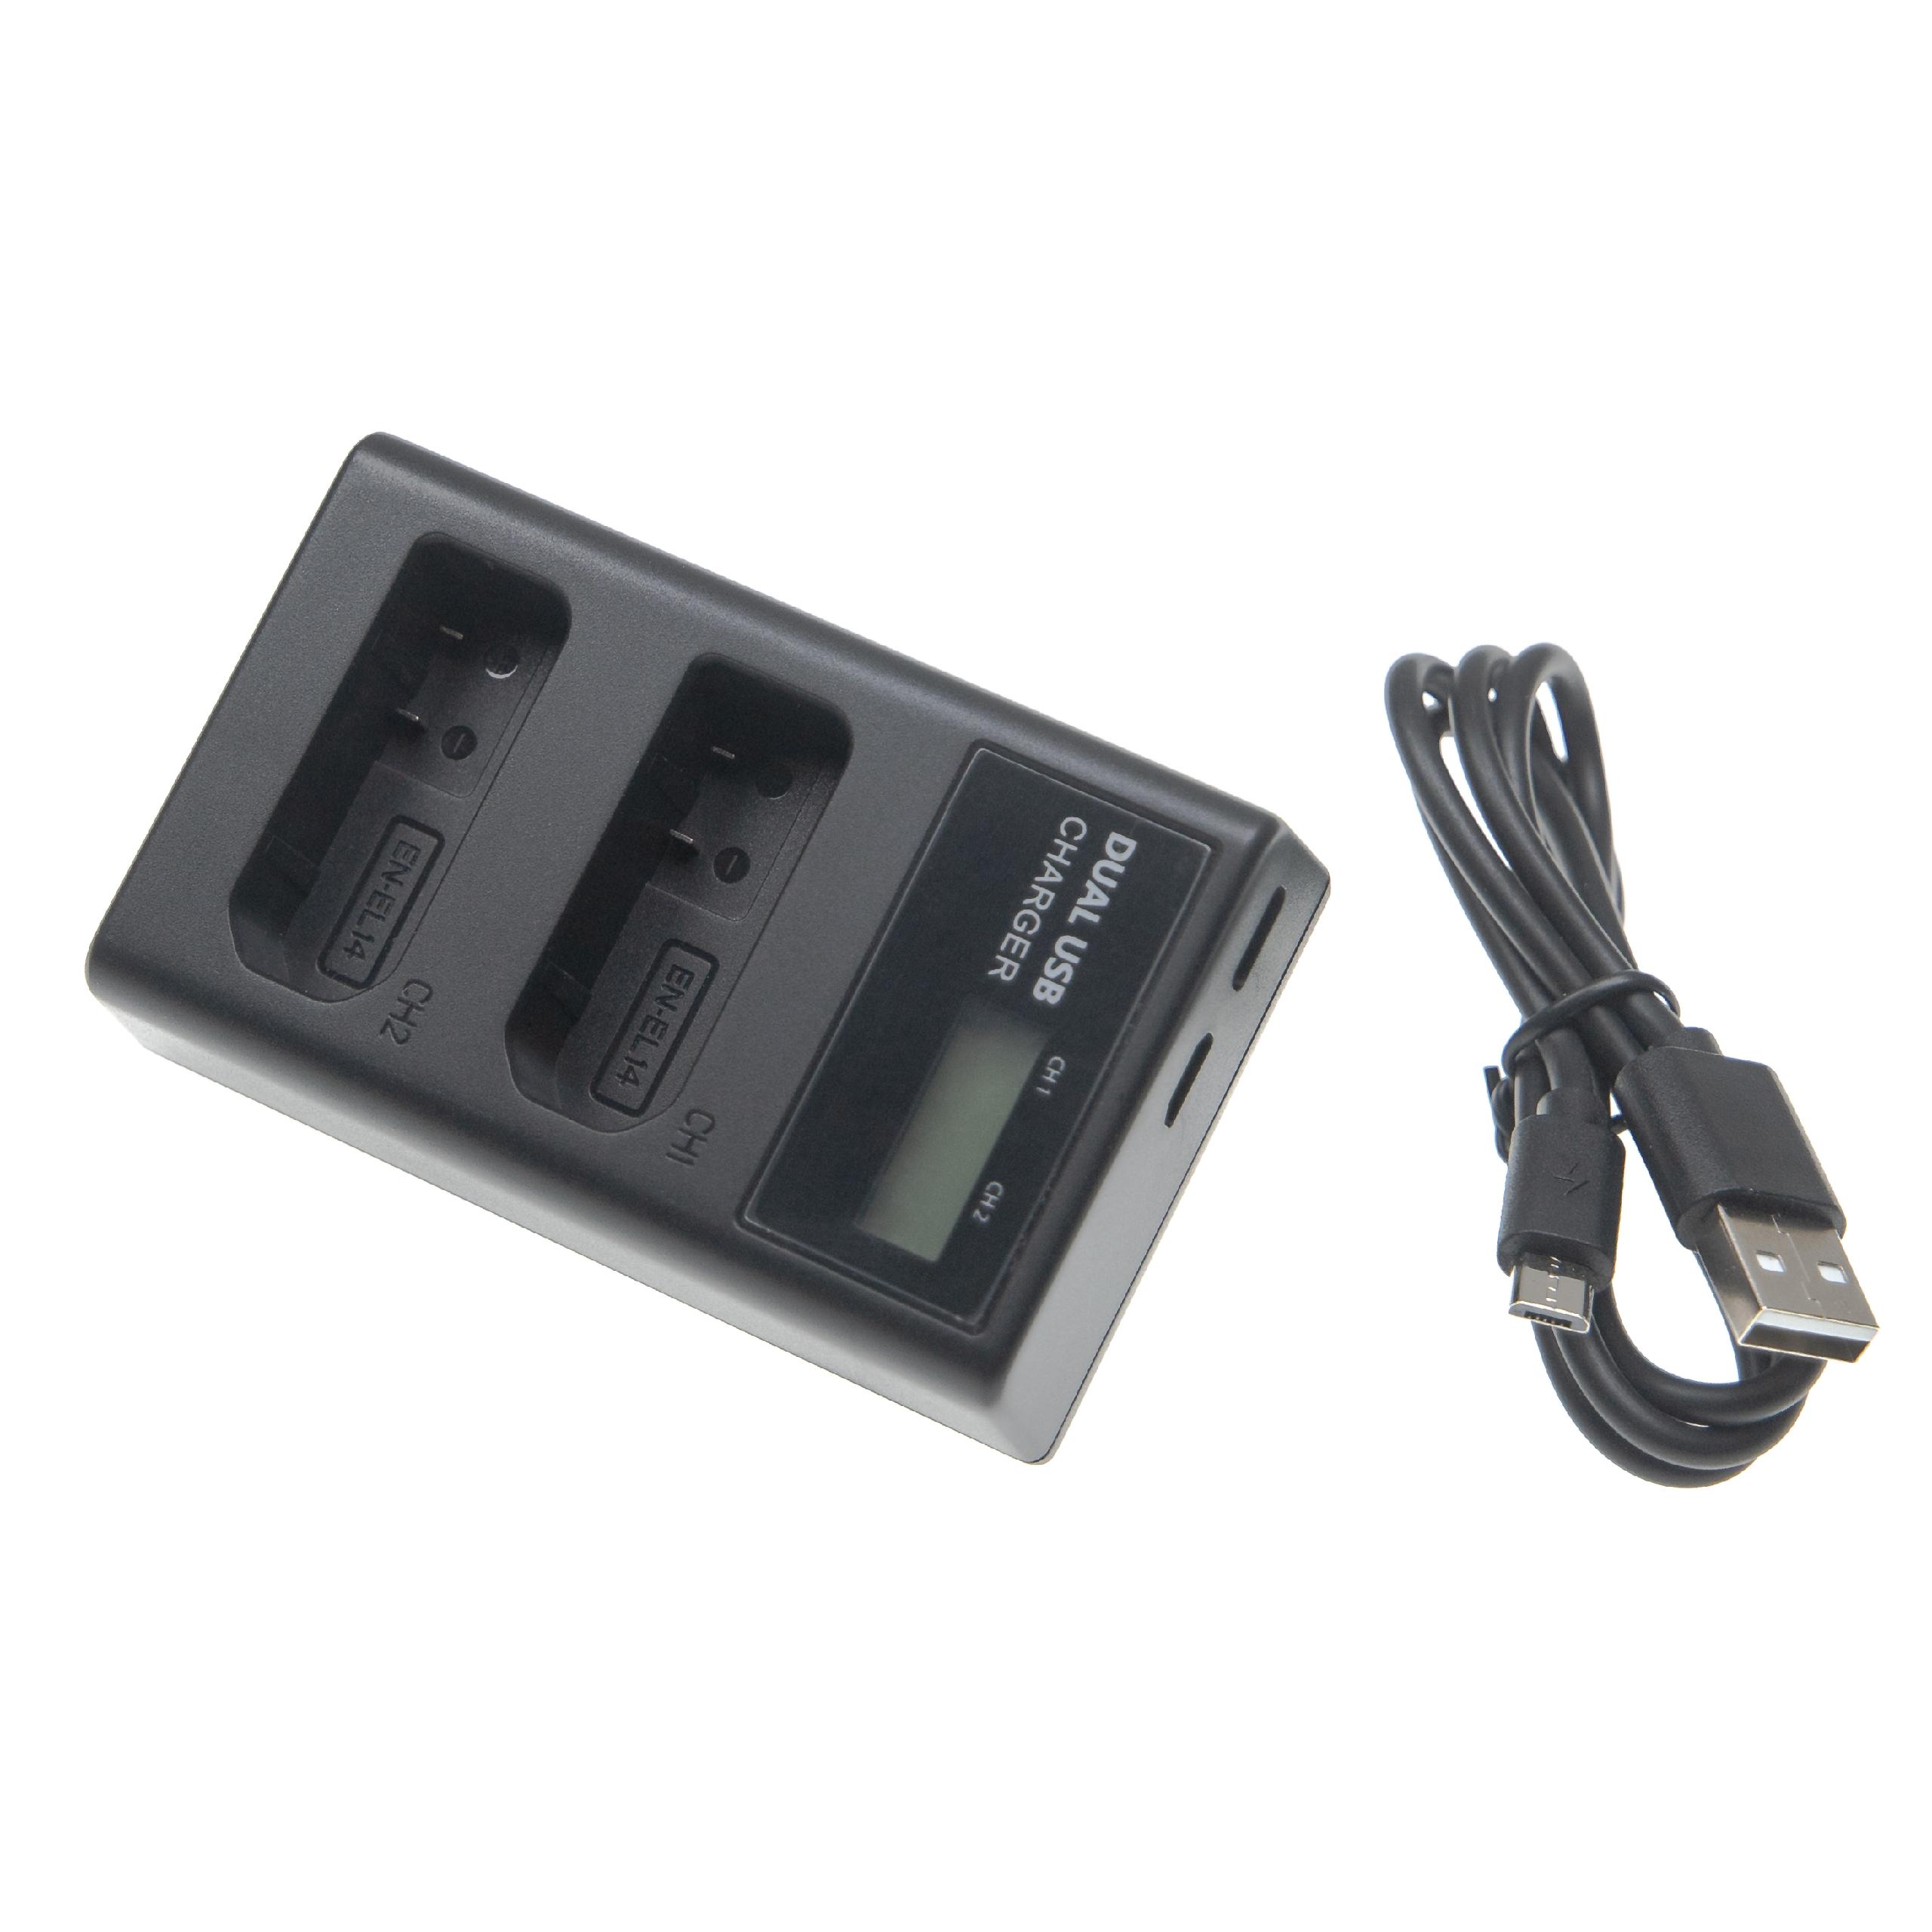 Battery Charger replaces Nikon MH-24 suitable for Coolpix P7000 Camera etc. - 0.5 A, 8.4 V